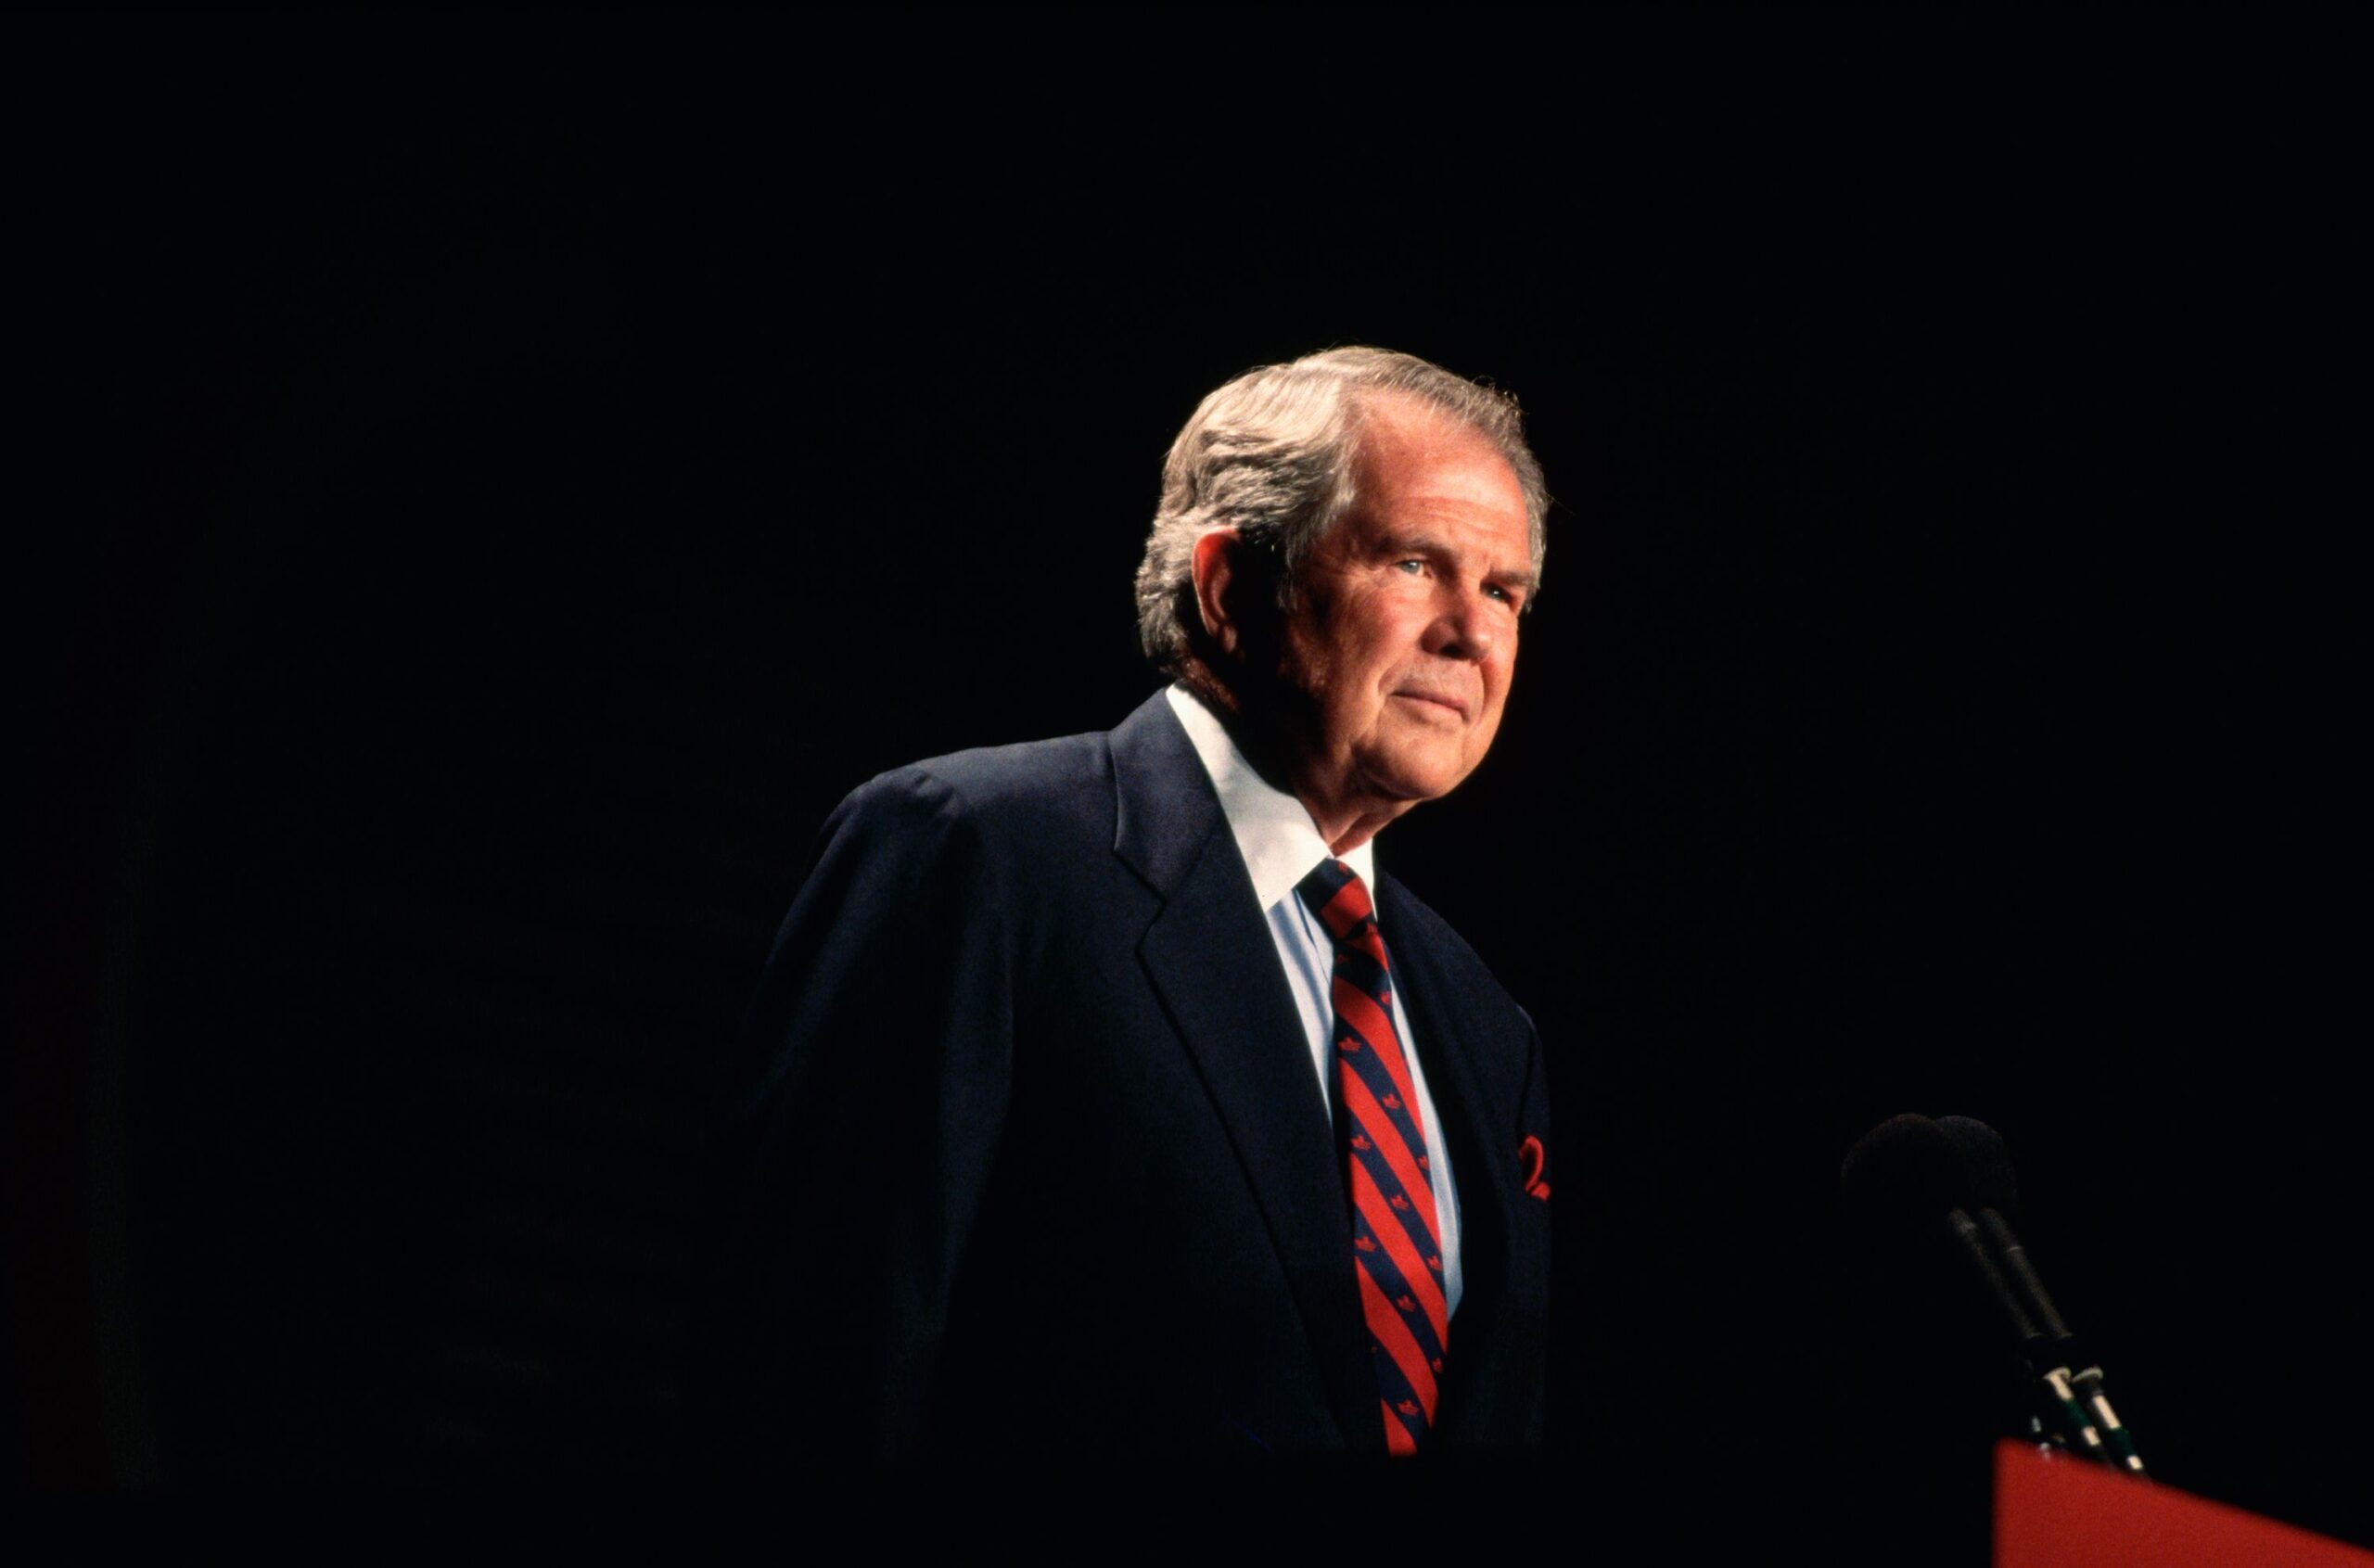 Television evangelist and conservative political activist Pat Robertson speaks to a meeting of the ...